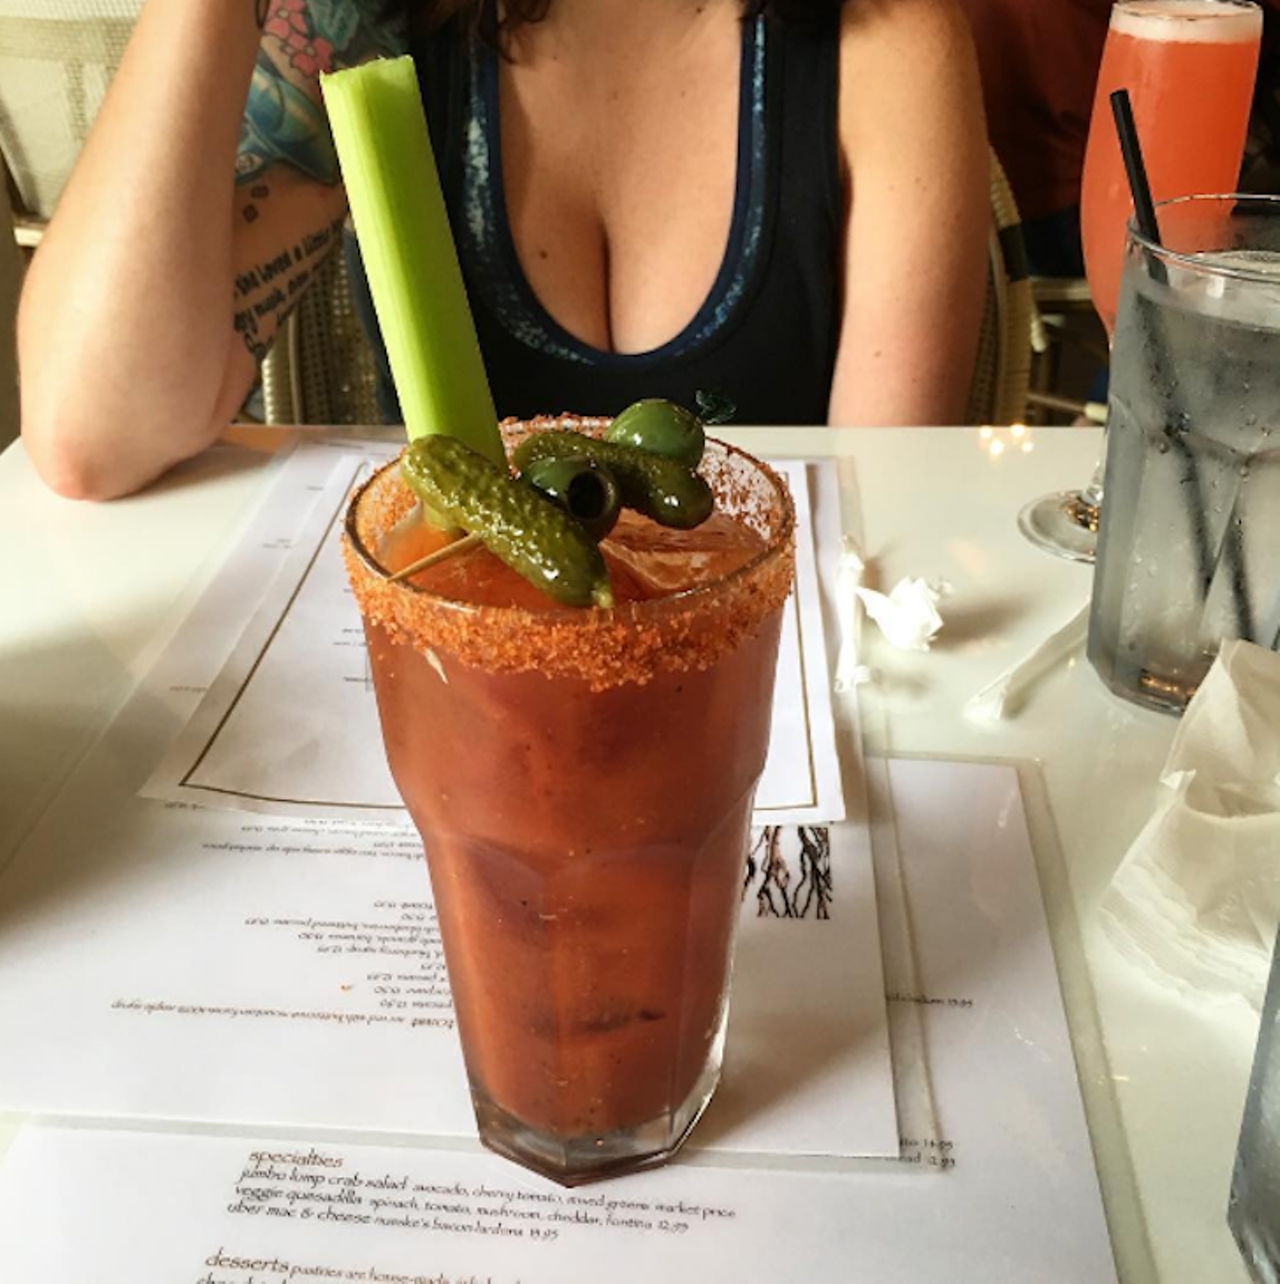 The Briarpatch
252 N. Park Ave., Winter Park | 407-628-8651
Don't let the line out the door turn you away from Briarpatch. Their spicy Bloody Mary demands to be paired with their cloud-like fluffy truffle fried eggs.
Photo via subsurfaceinvestigations/Instagram